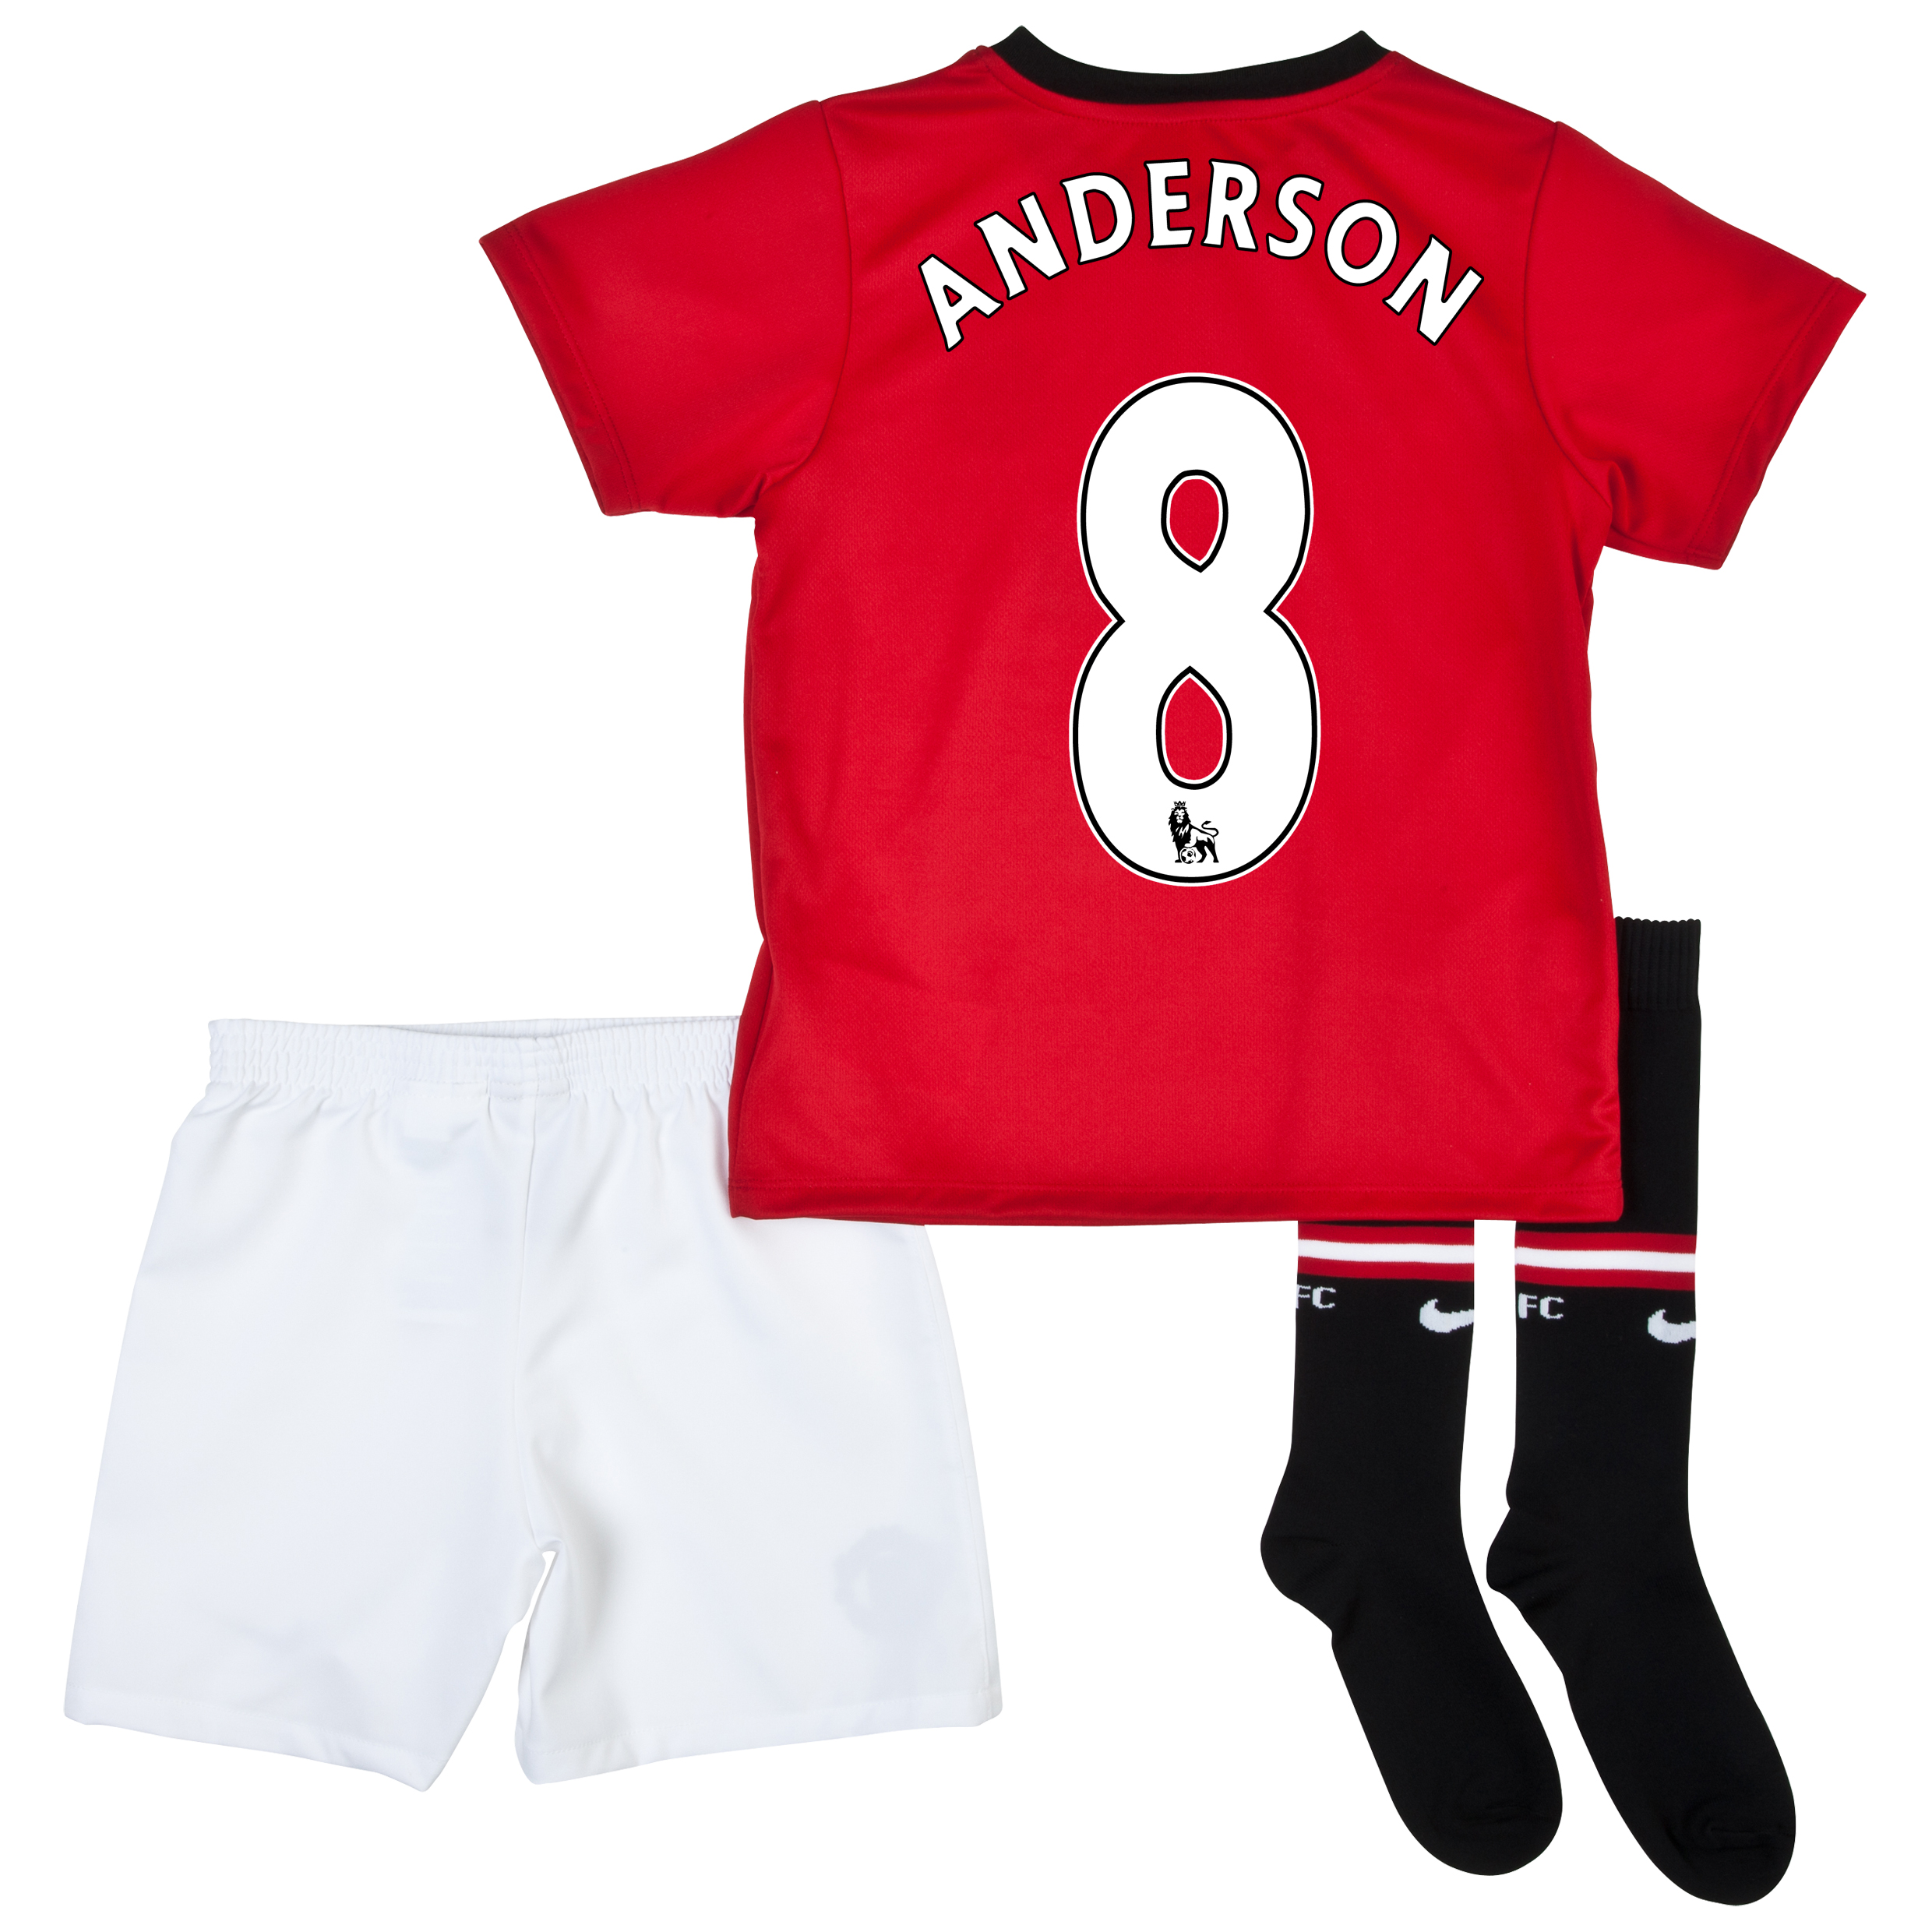 Manchester United Home Kit 2013/14 - Little Boys with Anderson 8 printing